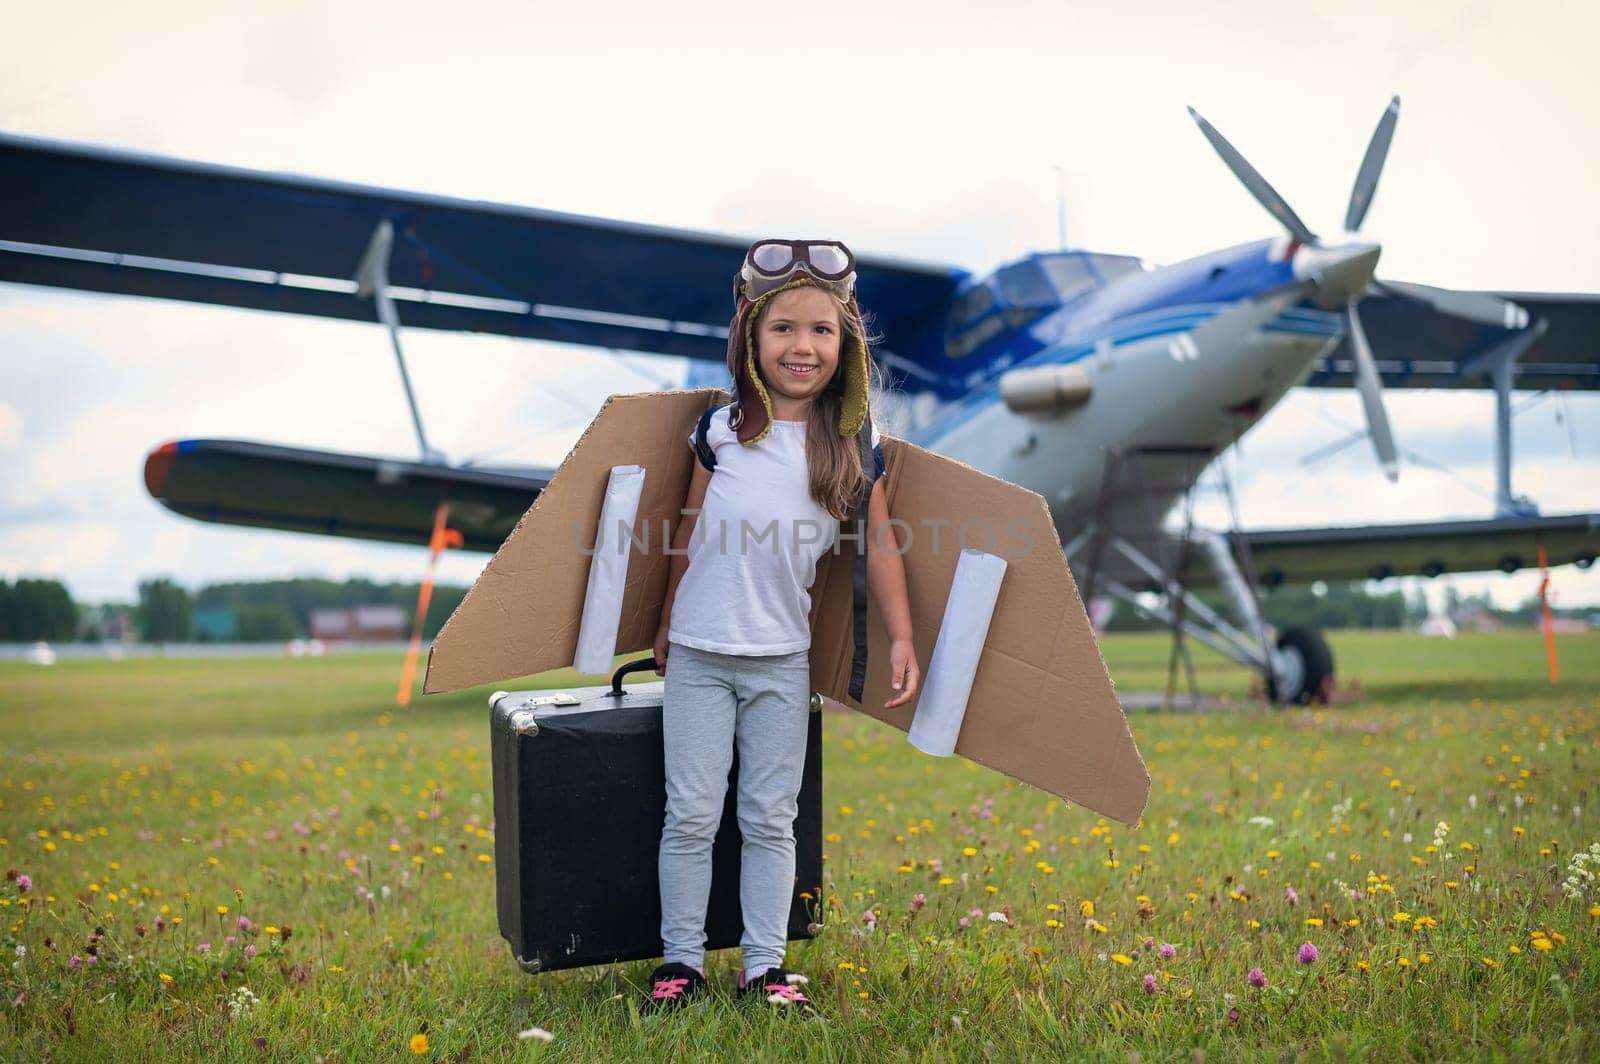 A little girl in a pilot's costume sits on a retro suitcase at the airport waiting for the departure of the flight. A child in a hat and glasses is going on a trip by plane. by mrwed54